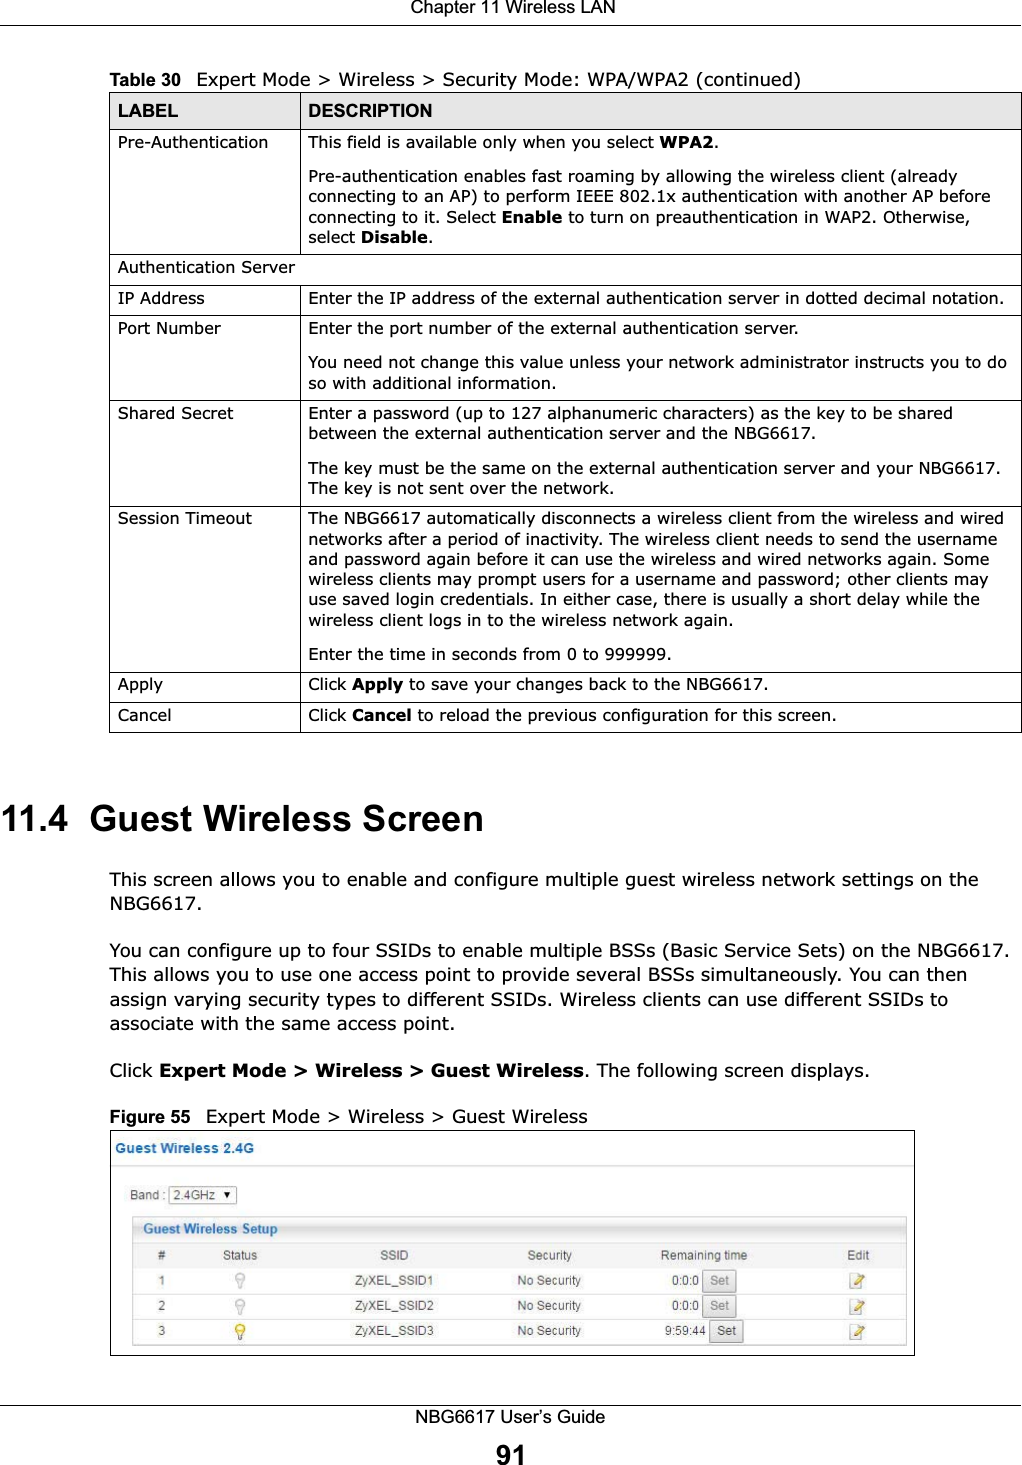  Chapter 11 Wireless LANNBG6617 User’s Guide9111.4  Guest Wireless Screen This screen allows you to enable and configure multiple guest wireless network settings on the NBG6617.You can configure up to four SSIDs to enable multiple BSSs (Basic Service Sets) on the NBG6617. This allows you to use one access point to provide several BSSs simultaneously. You can then assign varying security types to different SSIDs. Wireless clients can use different SSIDs to associate with the same access point.Click Expert Mode &gt; Wireless &gt; Guest Wireless. The following screen displays.Figure 55   Expert Mode &gt; Wireless &gt; Guest WirelessPre-Authentication  This field is available only when you select WPA2.Pre-authentication enables fast roaming by allowing the wireless client (already connecting to an AP) to perform IEEE 802.1x authentication with another AP before connecting to it. Select Enable to turn on preauthentication in WAP2. Otherwise, select Disable.Authentication ServerIP Address Enter the IP address of the external authentication server in dotted decimal notation.Port Number Enter the port number of the external authentication server.  You need not change this value unless your network administrator instructs you to do so with additional information. Shared Secret Enter a password (up to 127 alphanumeric characters) as the key to be shared between the external authentication server and the NBG6617.The key must be the same on the external authentication server and your NBG6617. The key is not sent over the network. Session Timeout The NBG6617 automatically disconnects a wireless client from the wireless and wired networks after a period of inactivity. The wireless client needs to send the username and password again before it can use the wireless and wired networks again. Some wireless clients may prompt users for a username and password; other clients may use saved login credentials. In either case, there is usually a short delay while the wireless client logs in to the wireless network again.Enter the time in seconds from 0 to 999999.Apply Click Apply to save your changes back to the NBG6617.Cancel Click Cancel to reload the previous configuration for this screen.Table 30   Expert Mode &gt; Wireless &gt; Security Mode: WPA/WPA2 (continued)LABEL DESCRIPTION